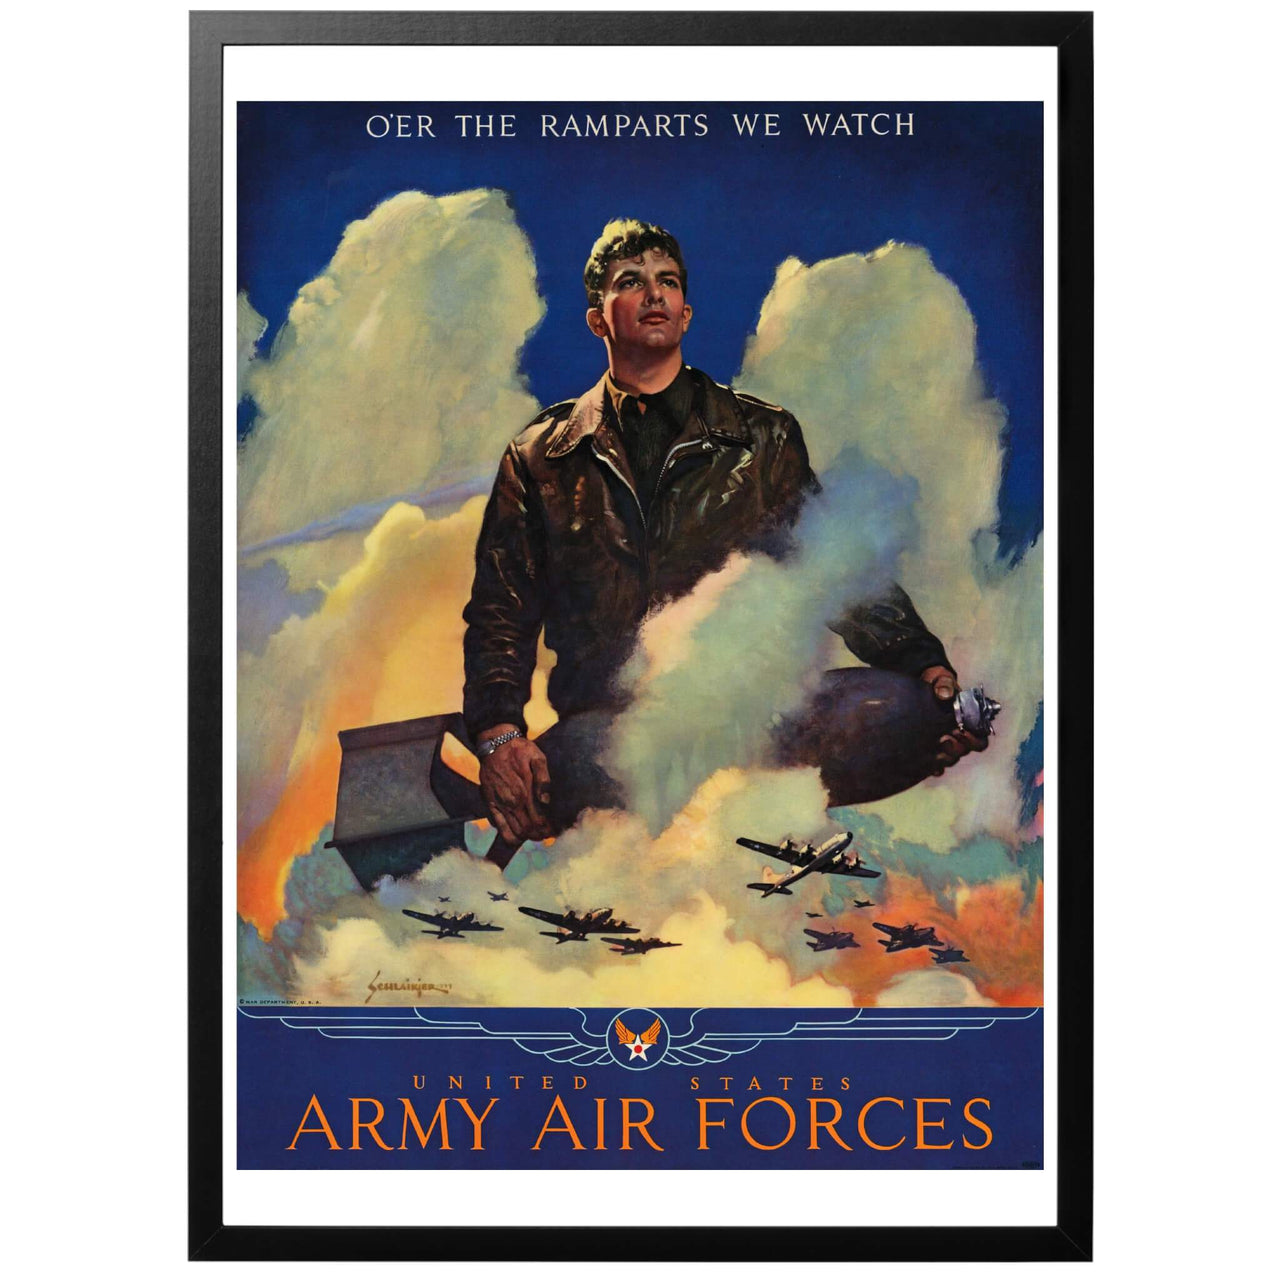 United States Army Air Forces Poster